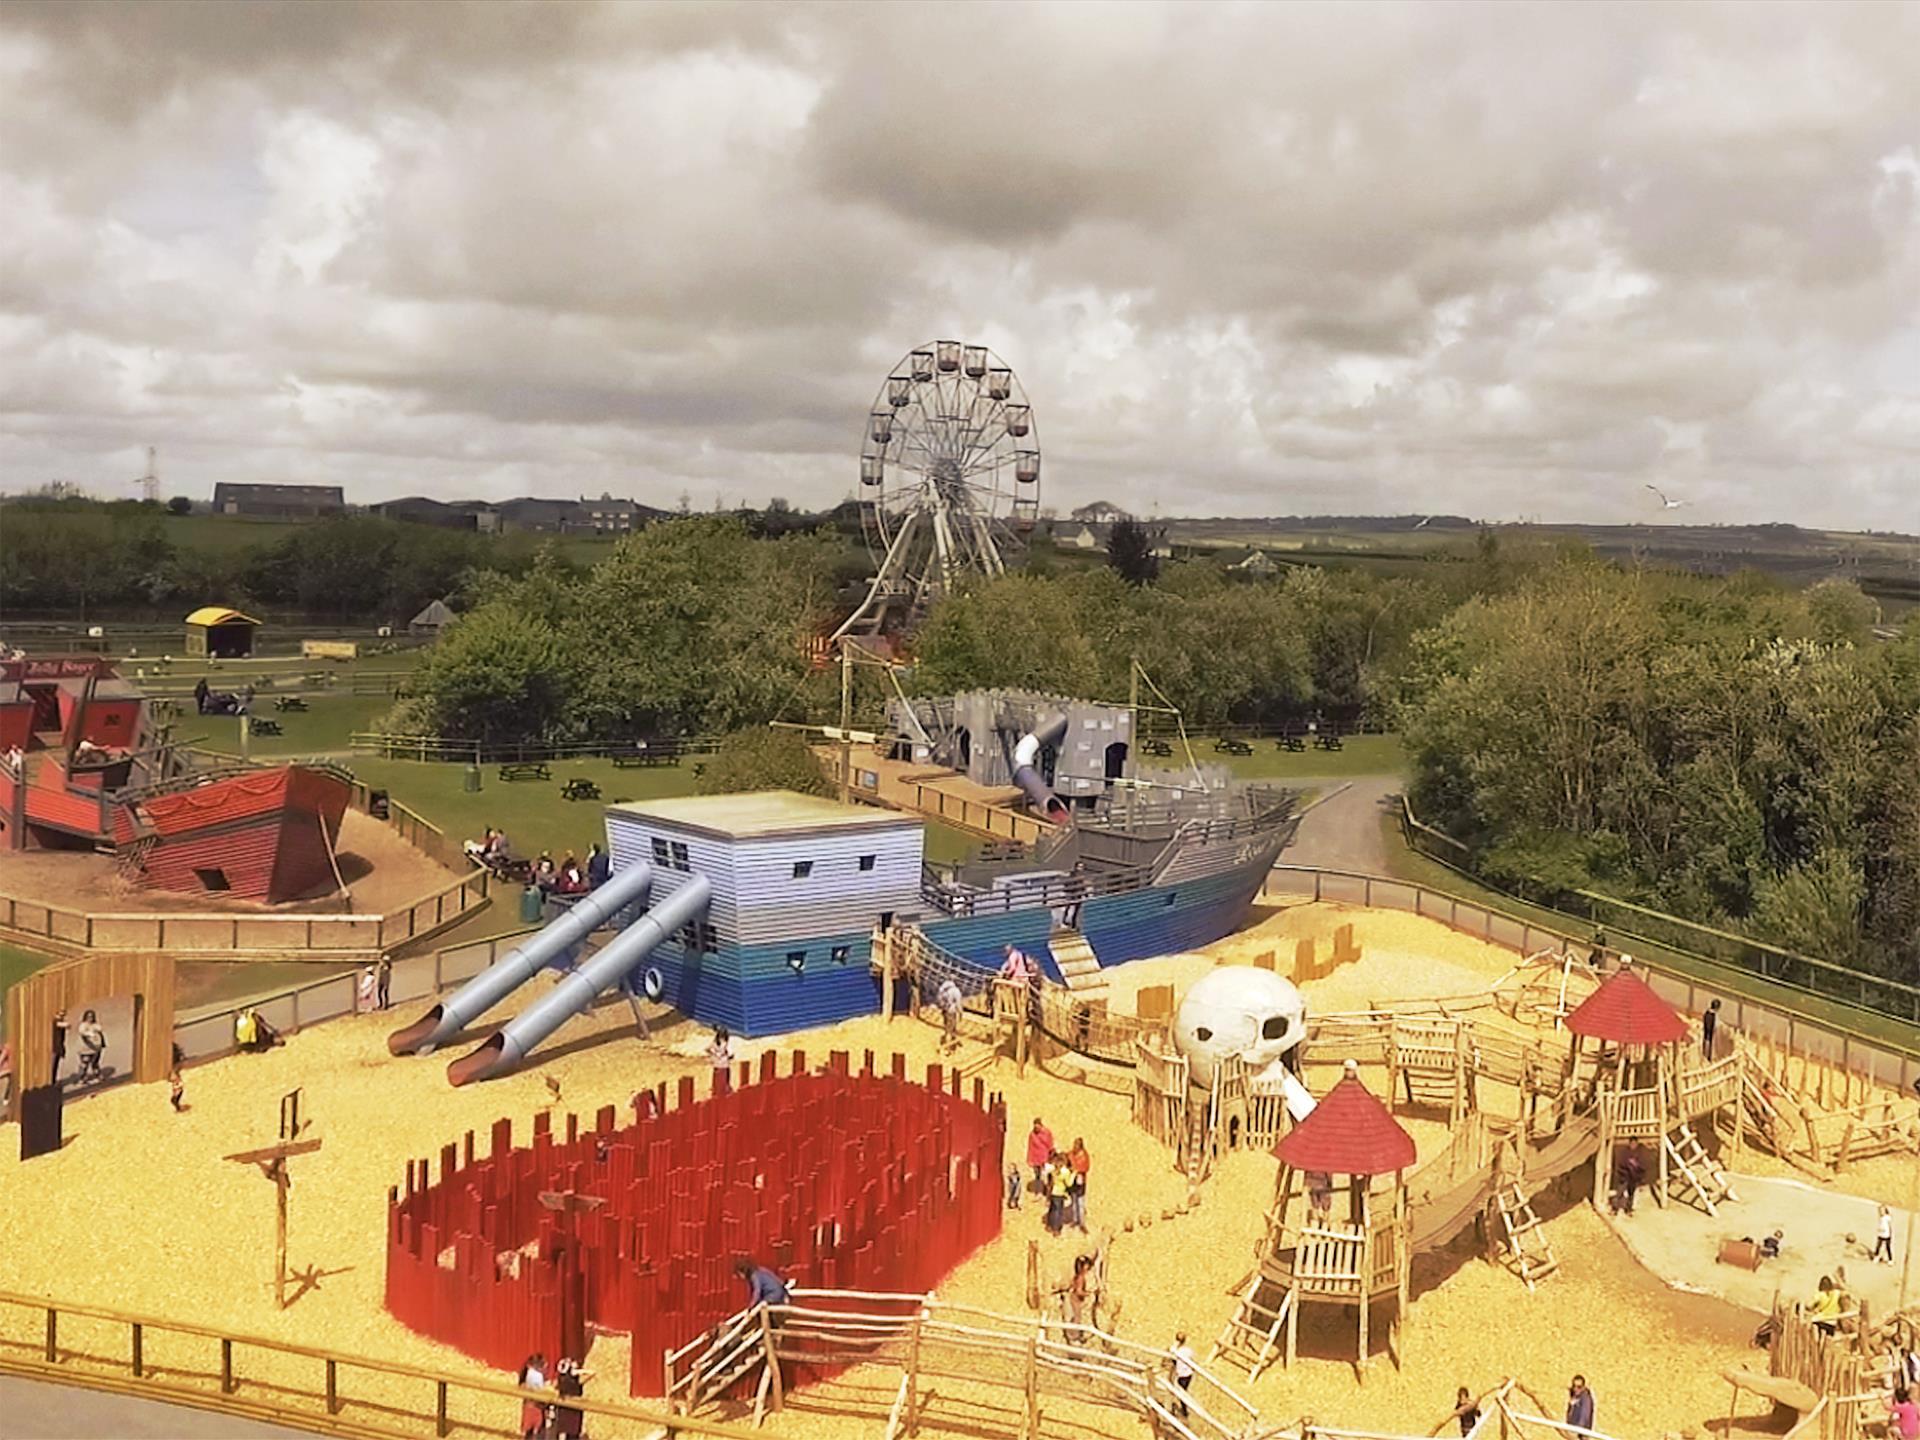 Black Bart's Pirate Playground at Folly Farm from above